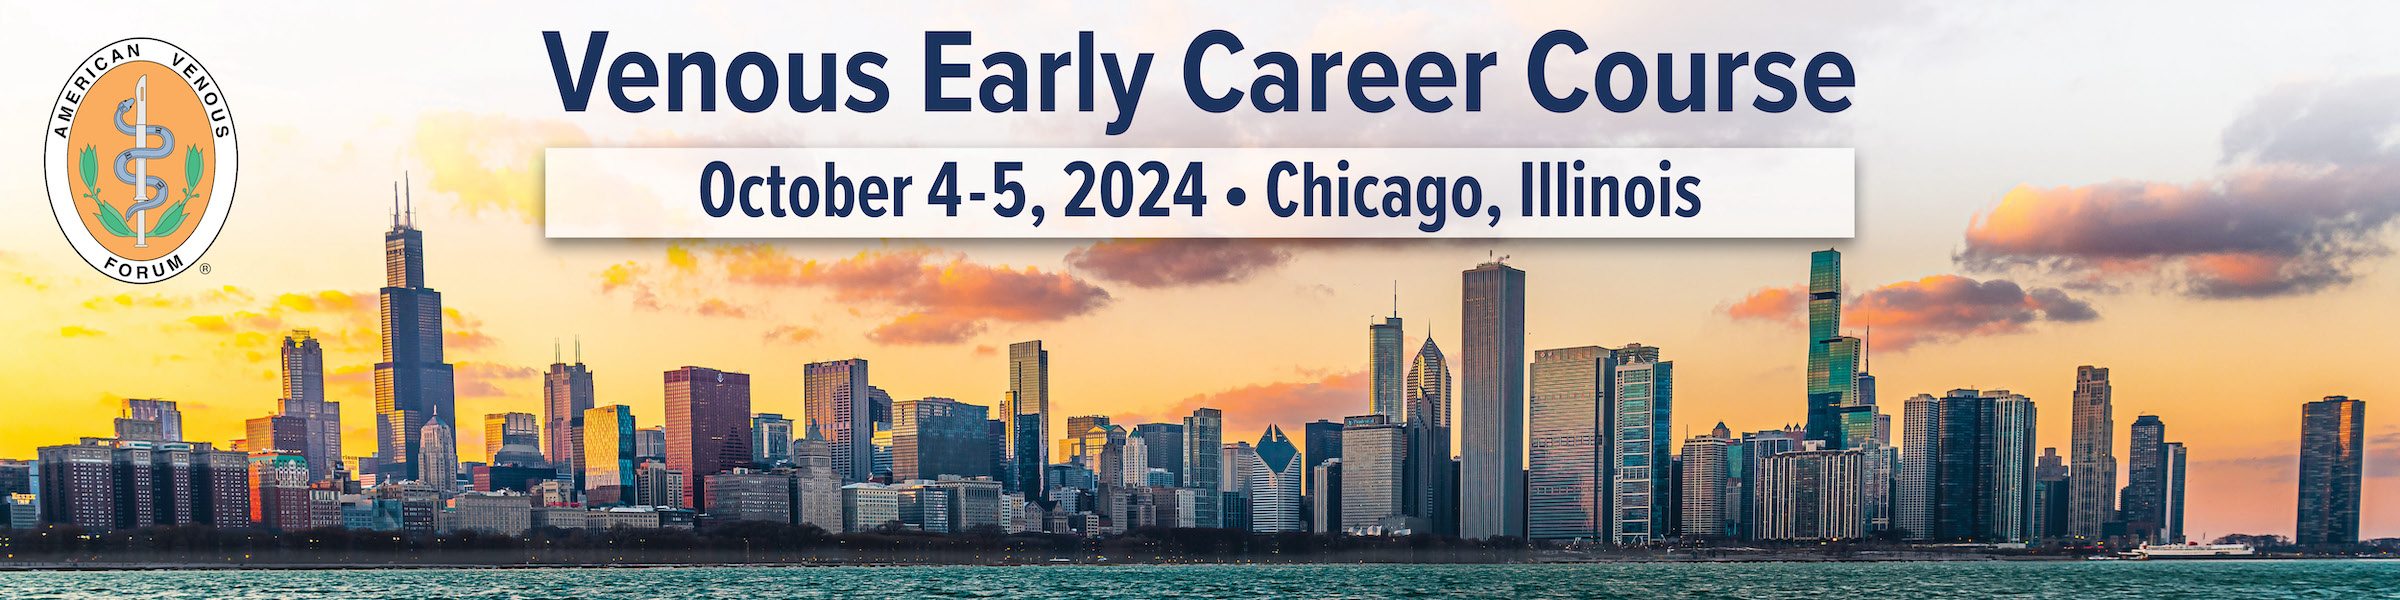 Early Career Course 2024